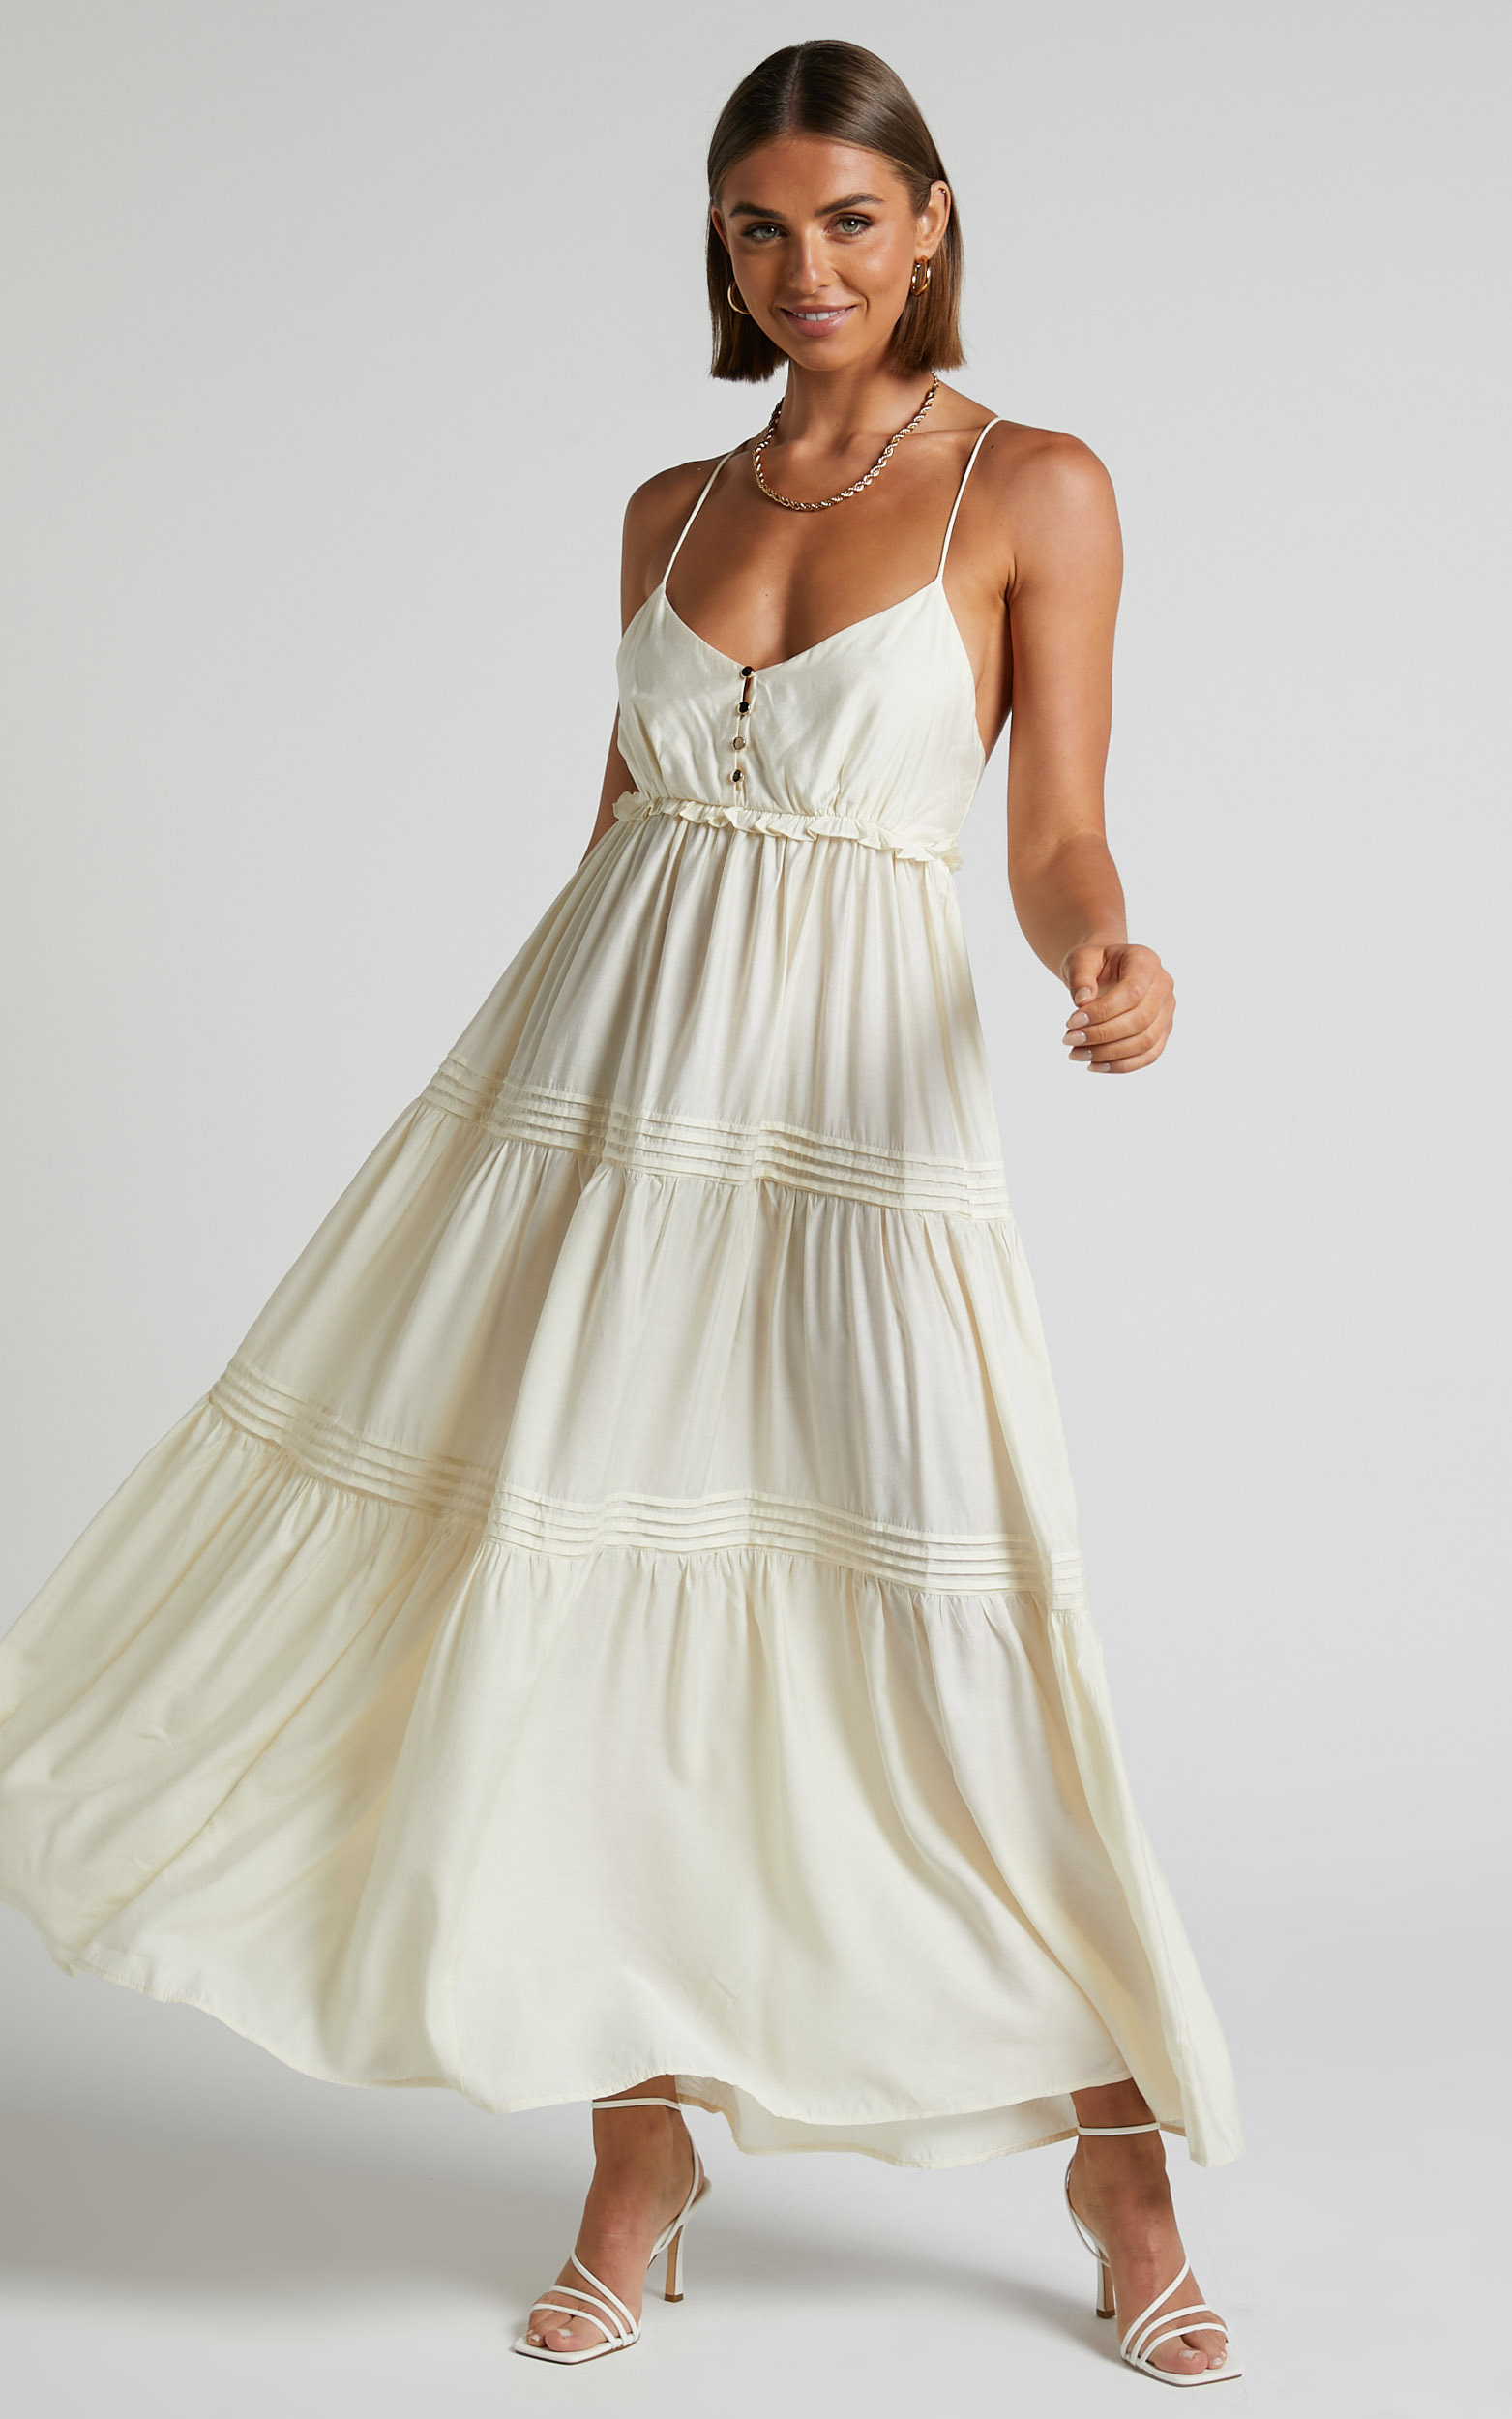 Ermengard Tiered Pin Tuck Cross Back Maxi Dress in Off White - 06, WHT1, hi-res image number null